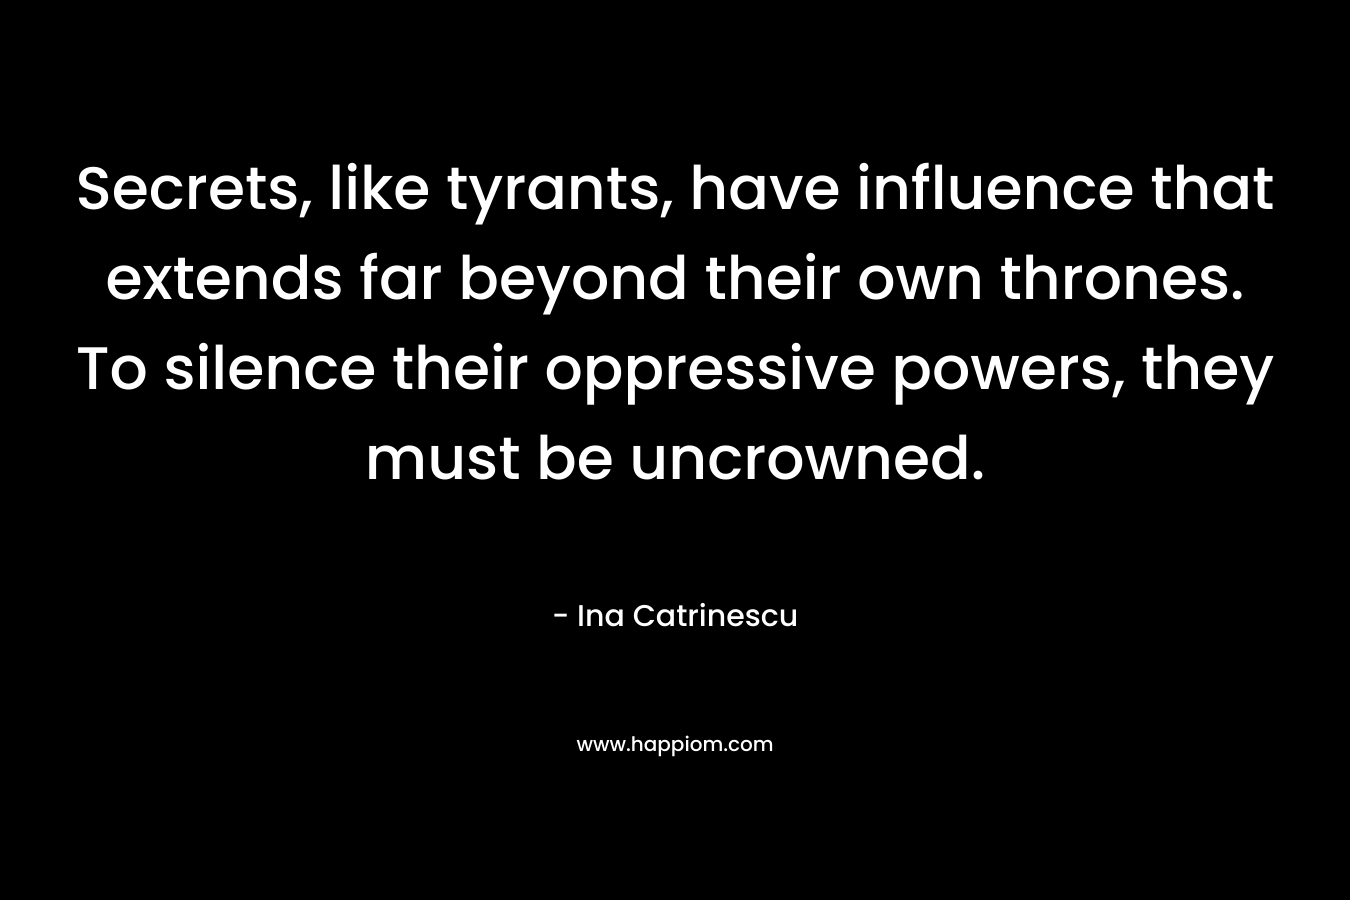 Secrets, like tyrants, have influence that extends far beyond their own thrones. To silence their oppressive powers, they must be uncrowned.